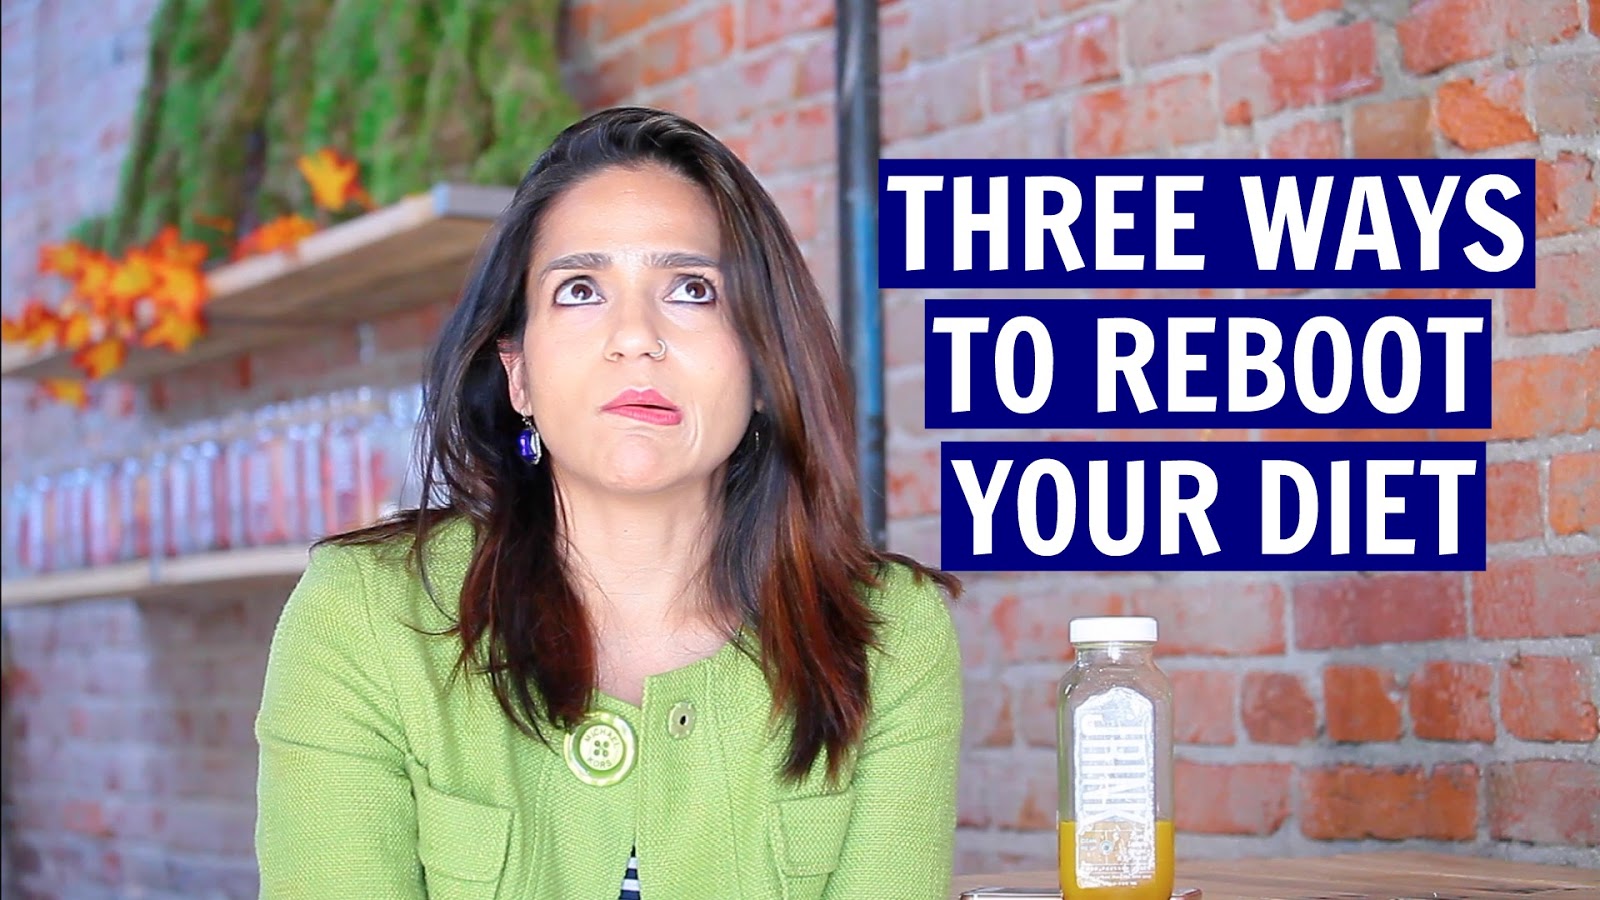 Three Ways To Reboot Your Diet | Tanvii.com - Indian Fashion, Lifestyle ...